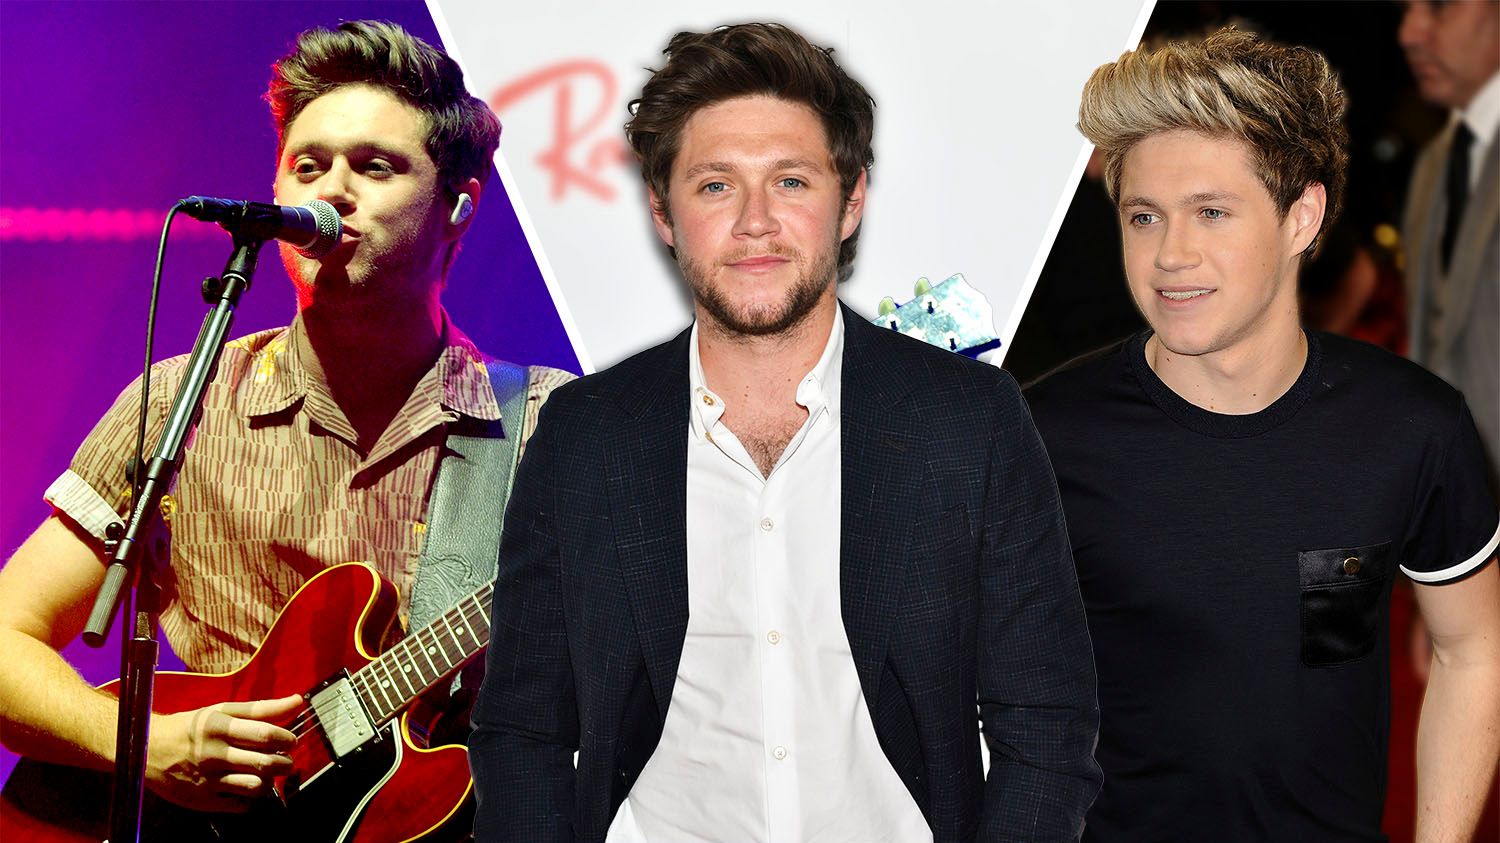 Niall Horan: Facts you never knew about the former One Direction star